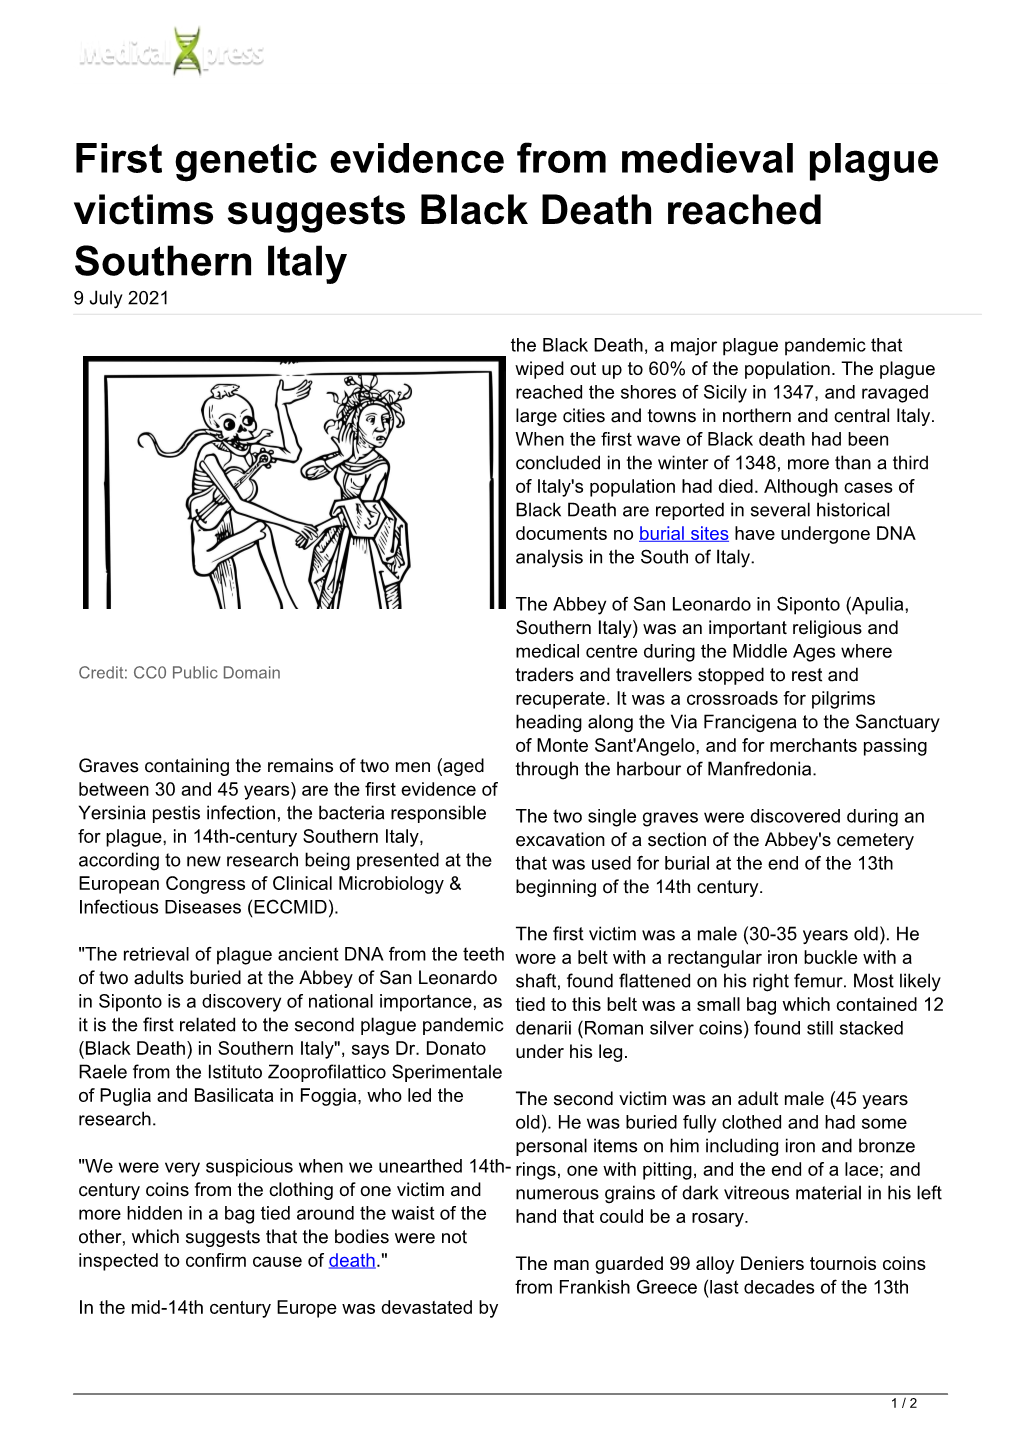 First Genetic Evidence from Medieval Plague Victims Suggests Black Death Reached Southern Italy 9 July 2021